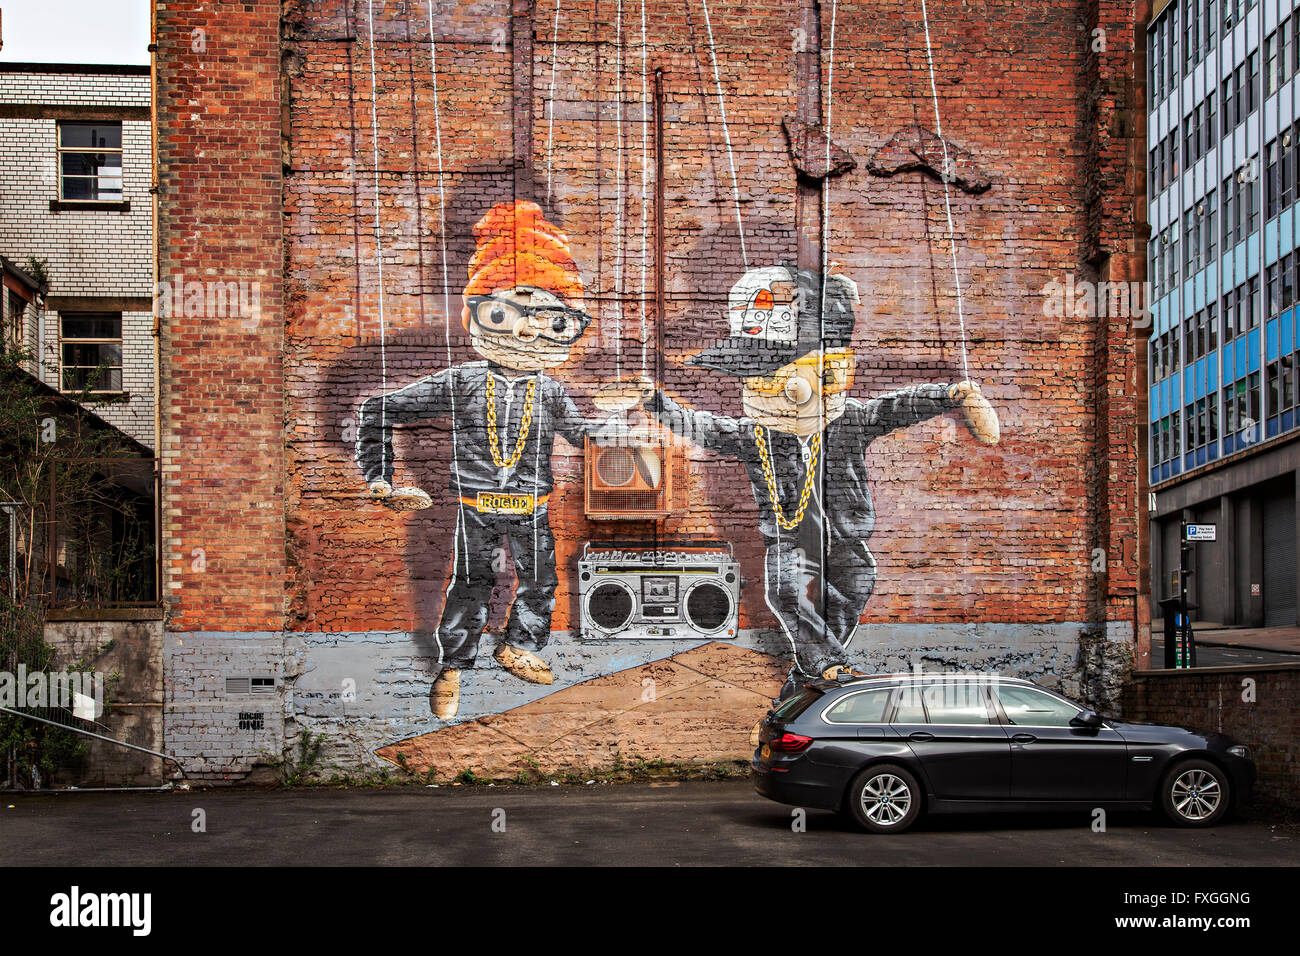 GLASGOW APRIL 02, 2016; Wall mural by artist Rogue One called 'Hip Hop Marionettes'. Glasgow, Scotland. Stock Photo